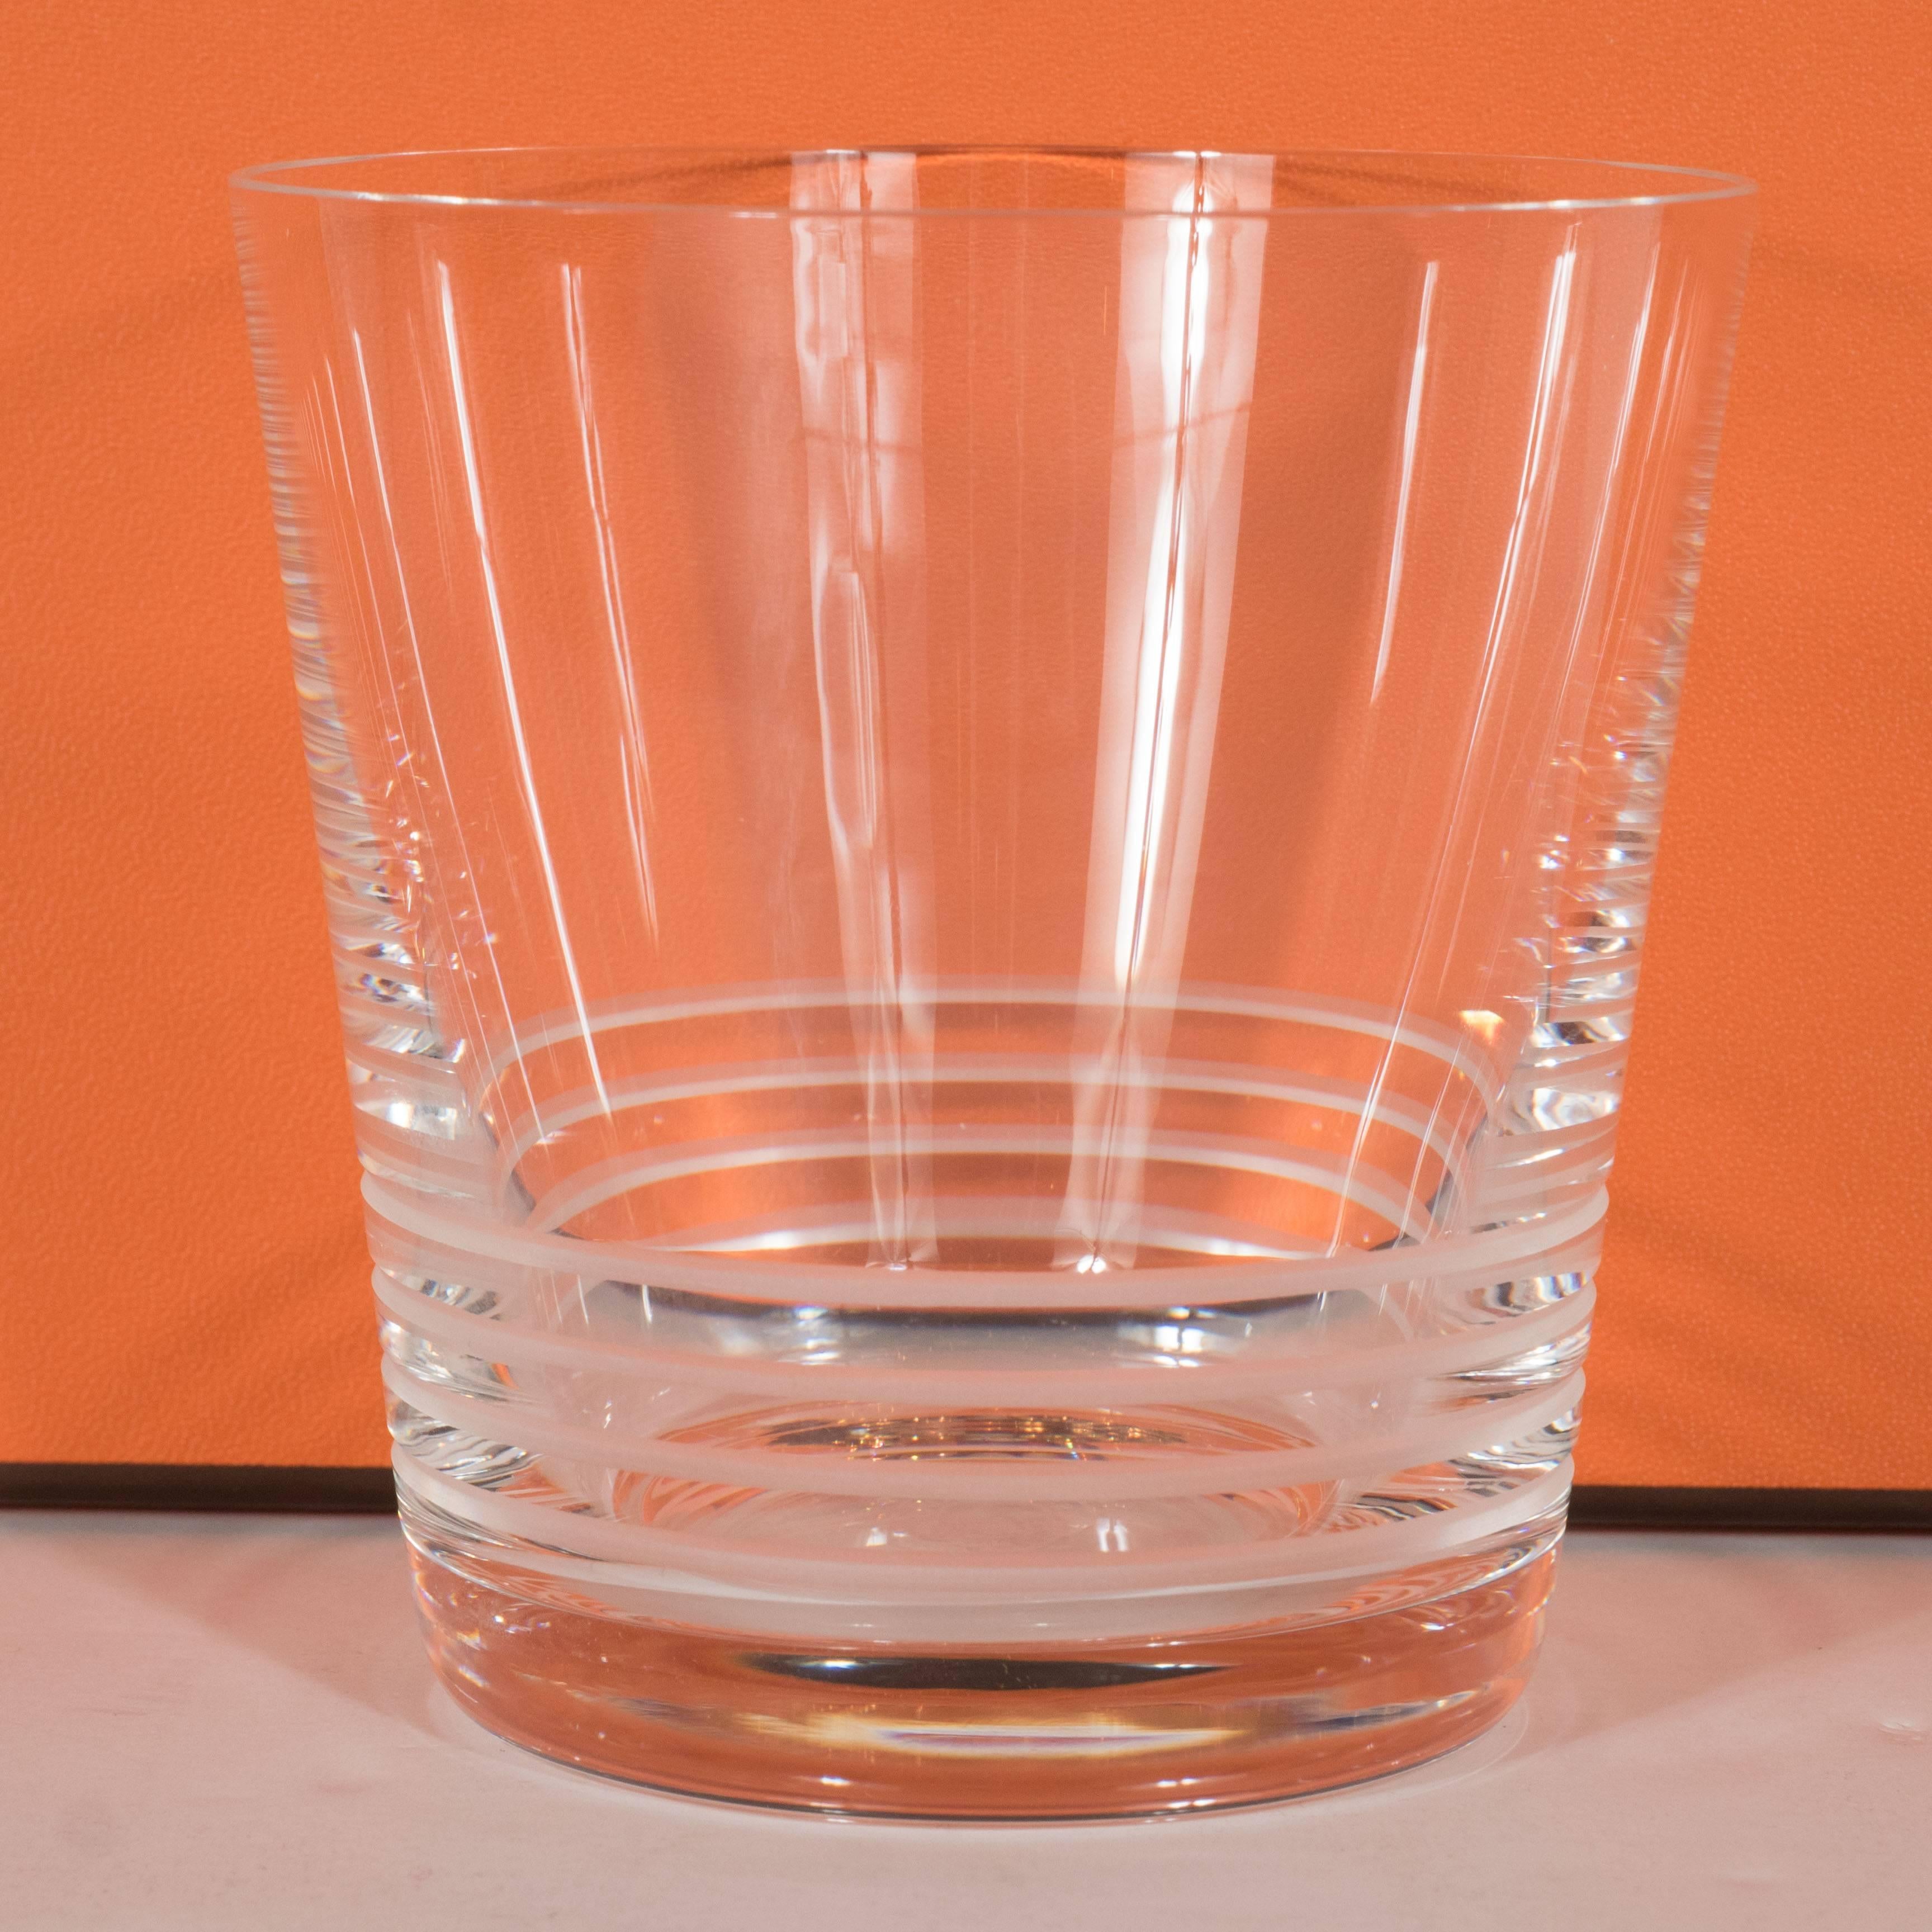 French Set of 12 Crystal Attelage Tumblers by Saint-Louis for Hermes in Original Box